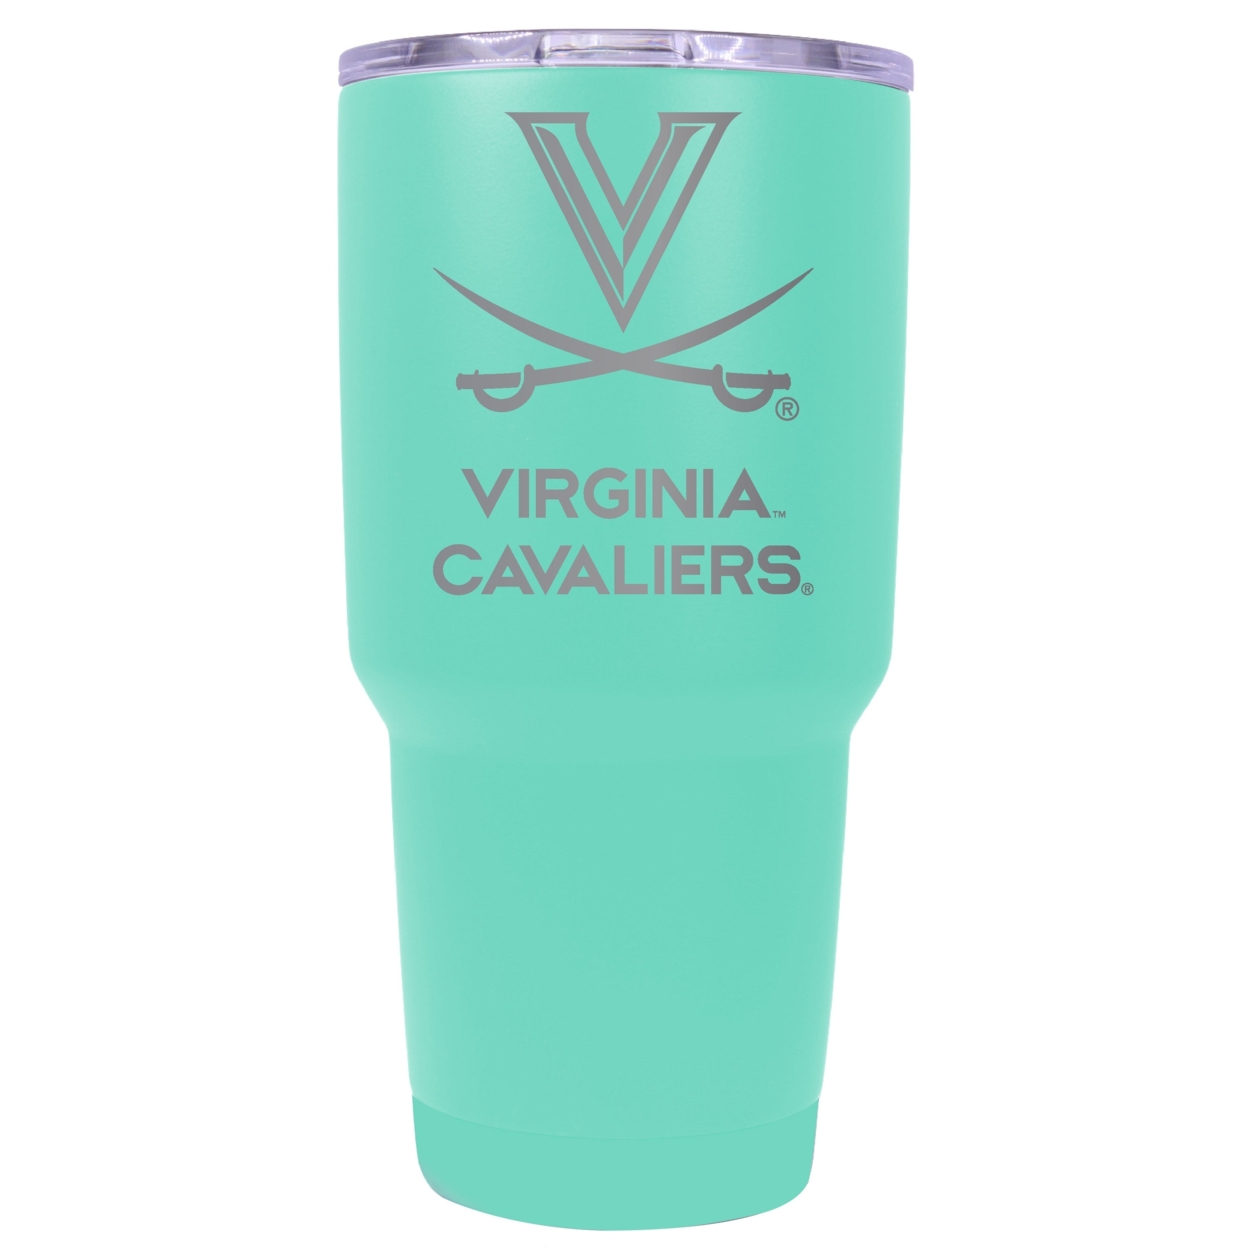 Virginia Cavaliers 24 Oz Laser Engraved Stainless Steel Insulated Tumbler - Choose Your Color. - Seafoam